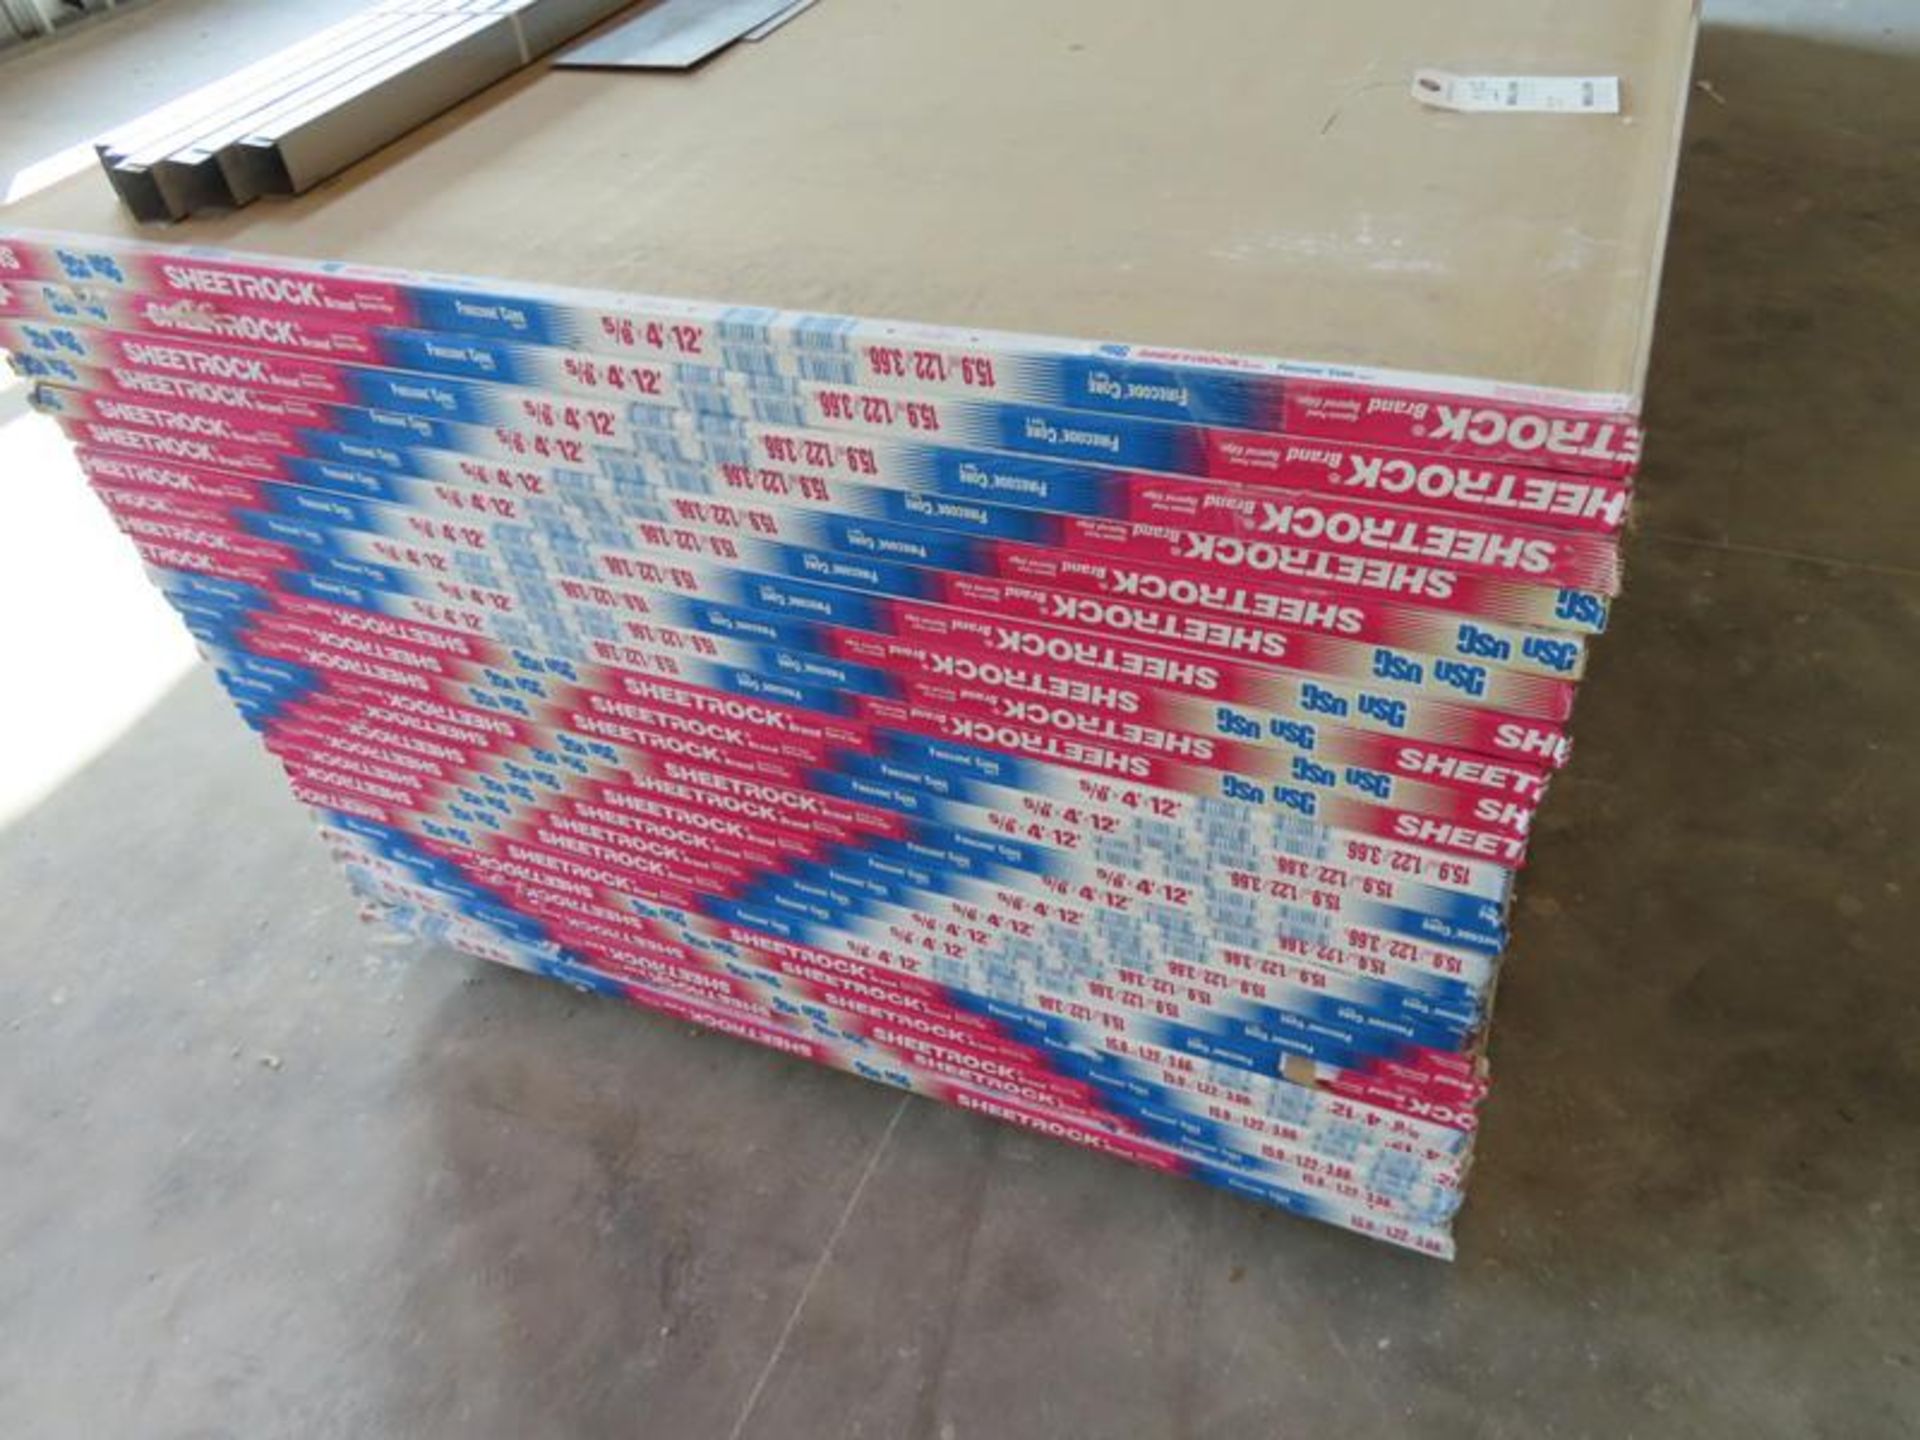 PALLET OF FIRECODE CORE TYPE X SHEETROCK, APPROXIMATELY 50 SHEETS - Image 2 of 4